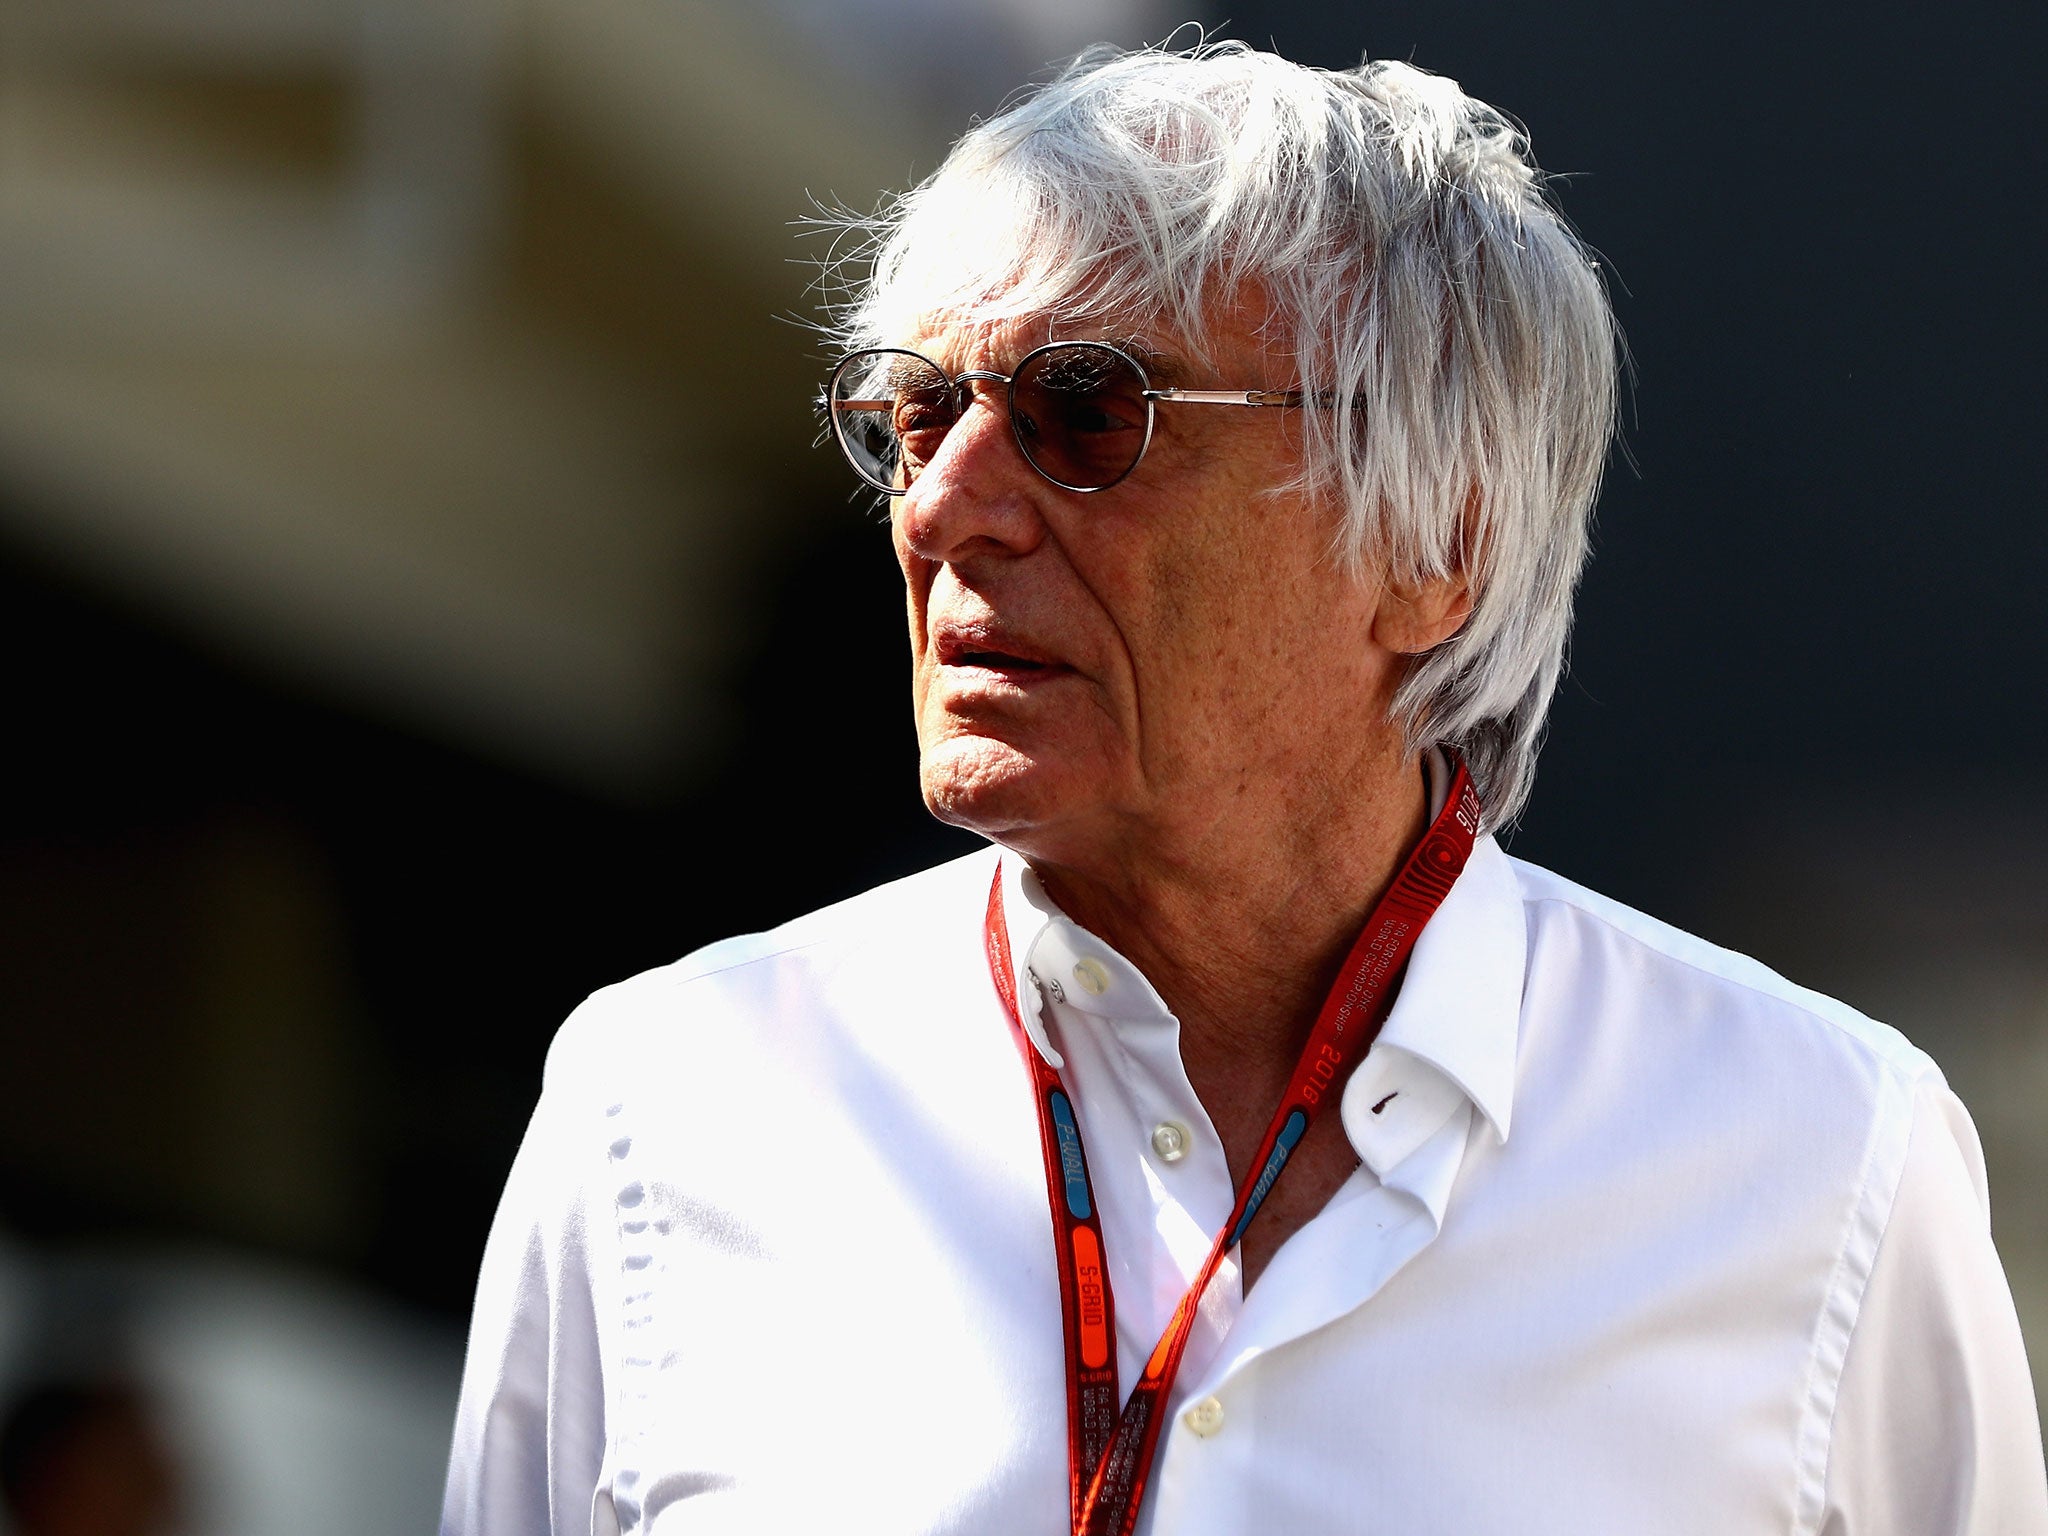 What next for Formula One now that Ecclestone is out of the picture?